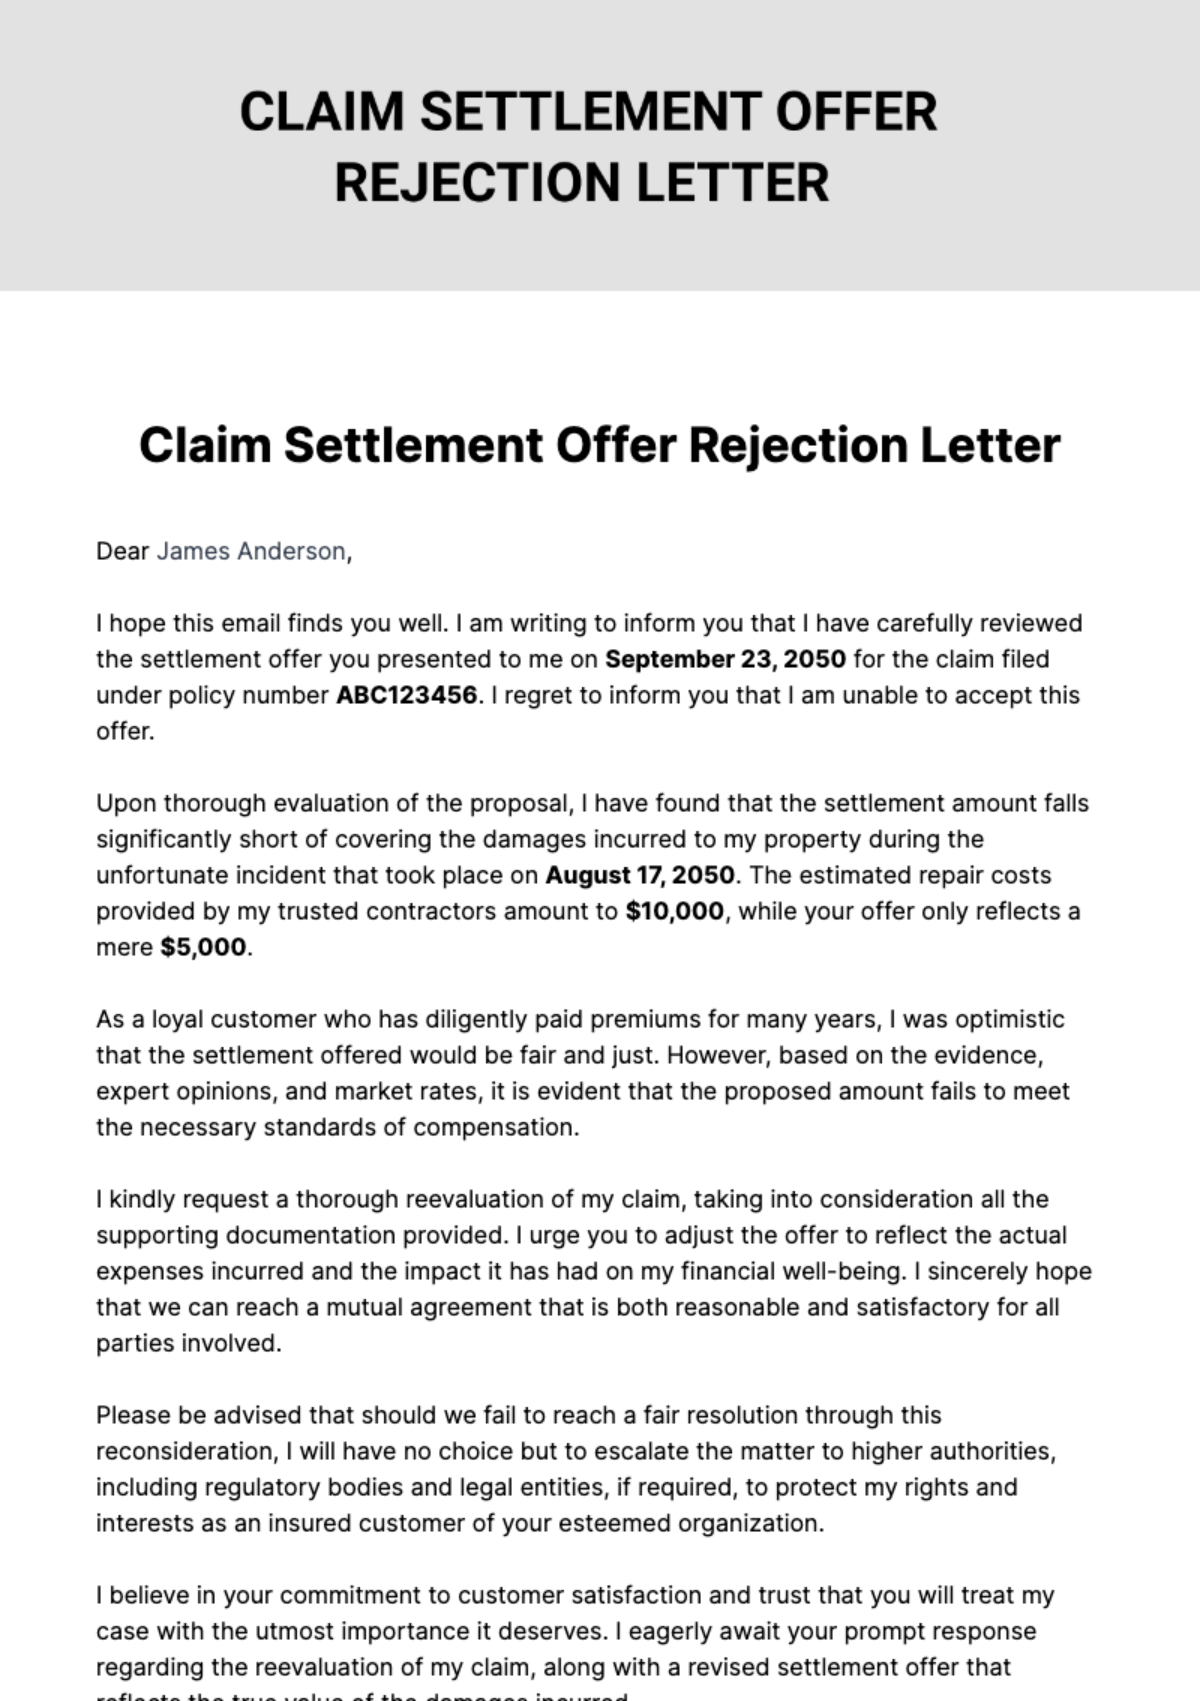 Free Claim Settlement Offer Rejection Letter Template